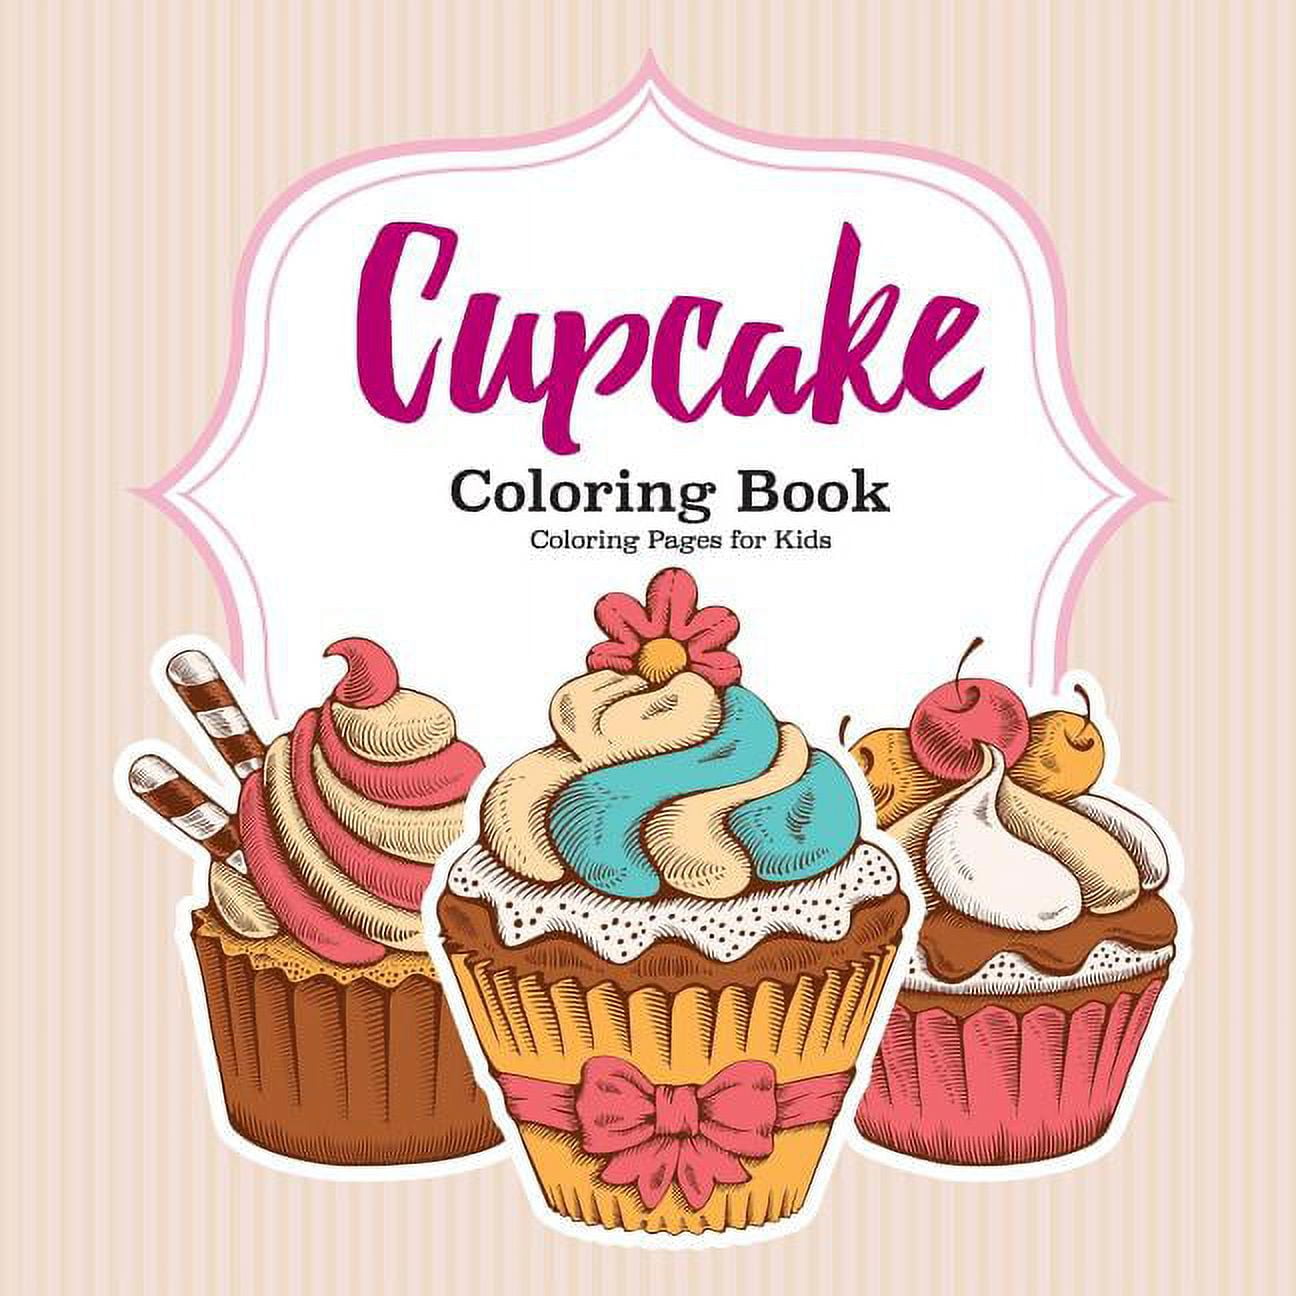 Cupcake Coloring Book for kids ages 2-8: 50 cute cupcakes coloring pages -  Desserts coloring book for kids - Coloring Book for Kids & Toddlers - Child  (Paperback)